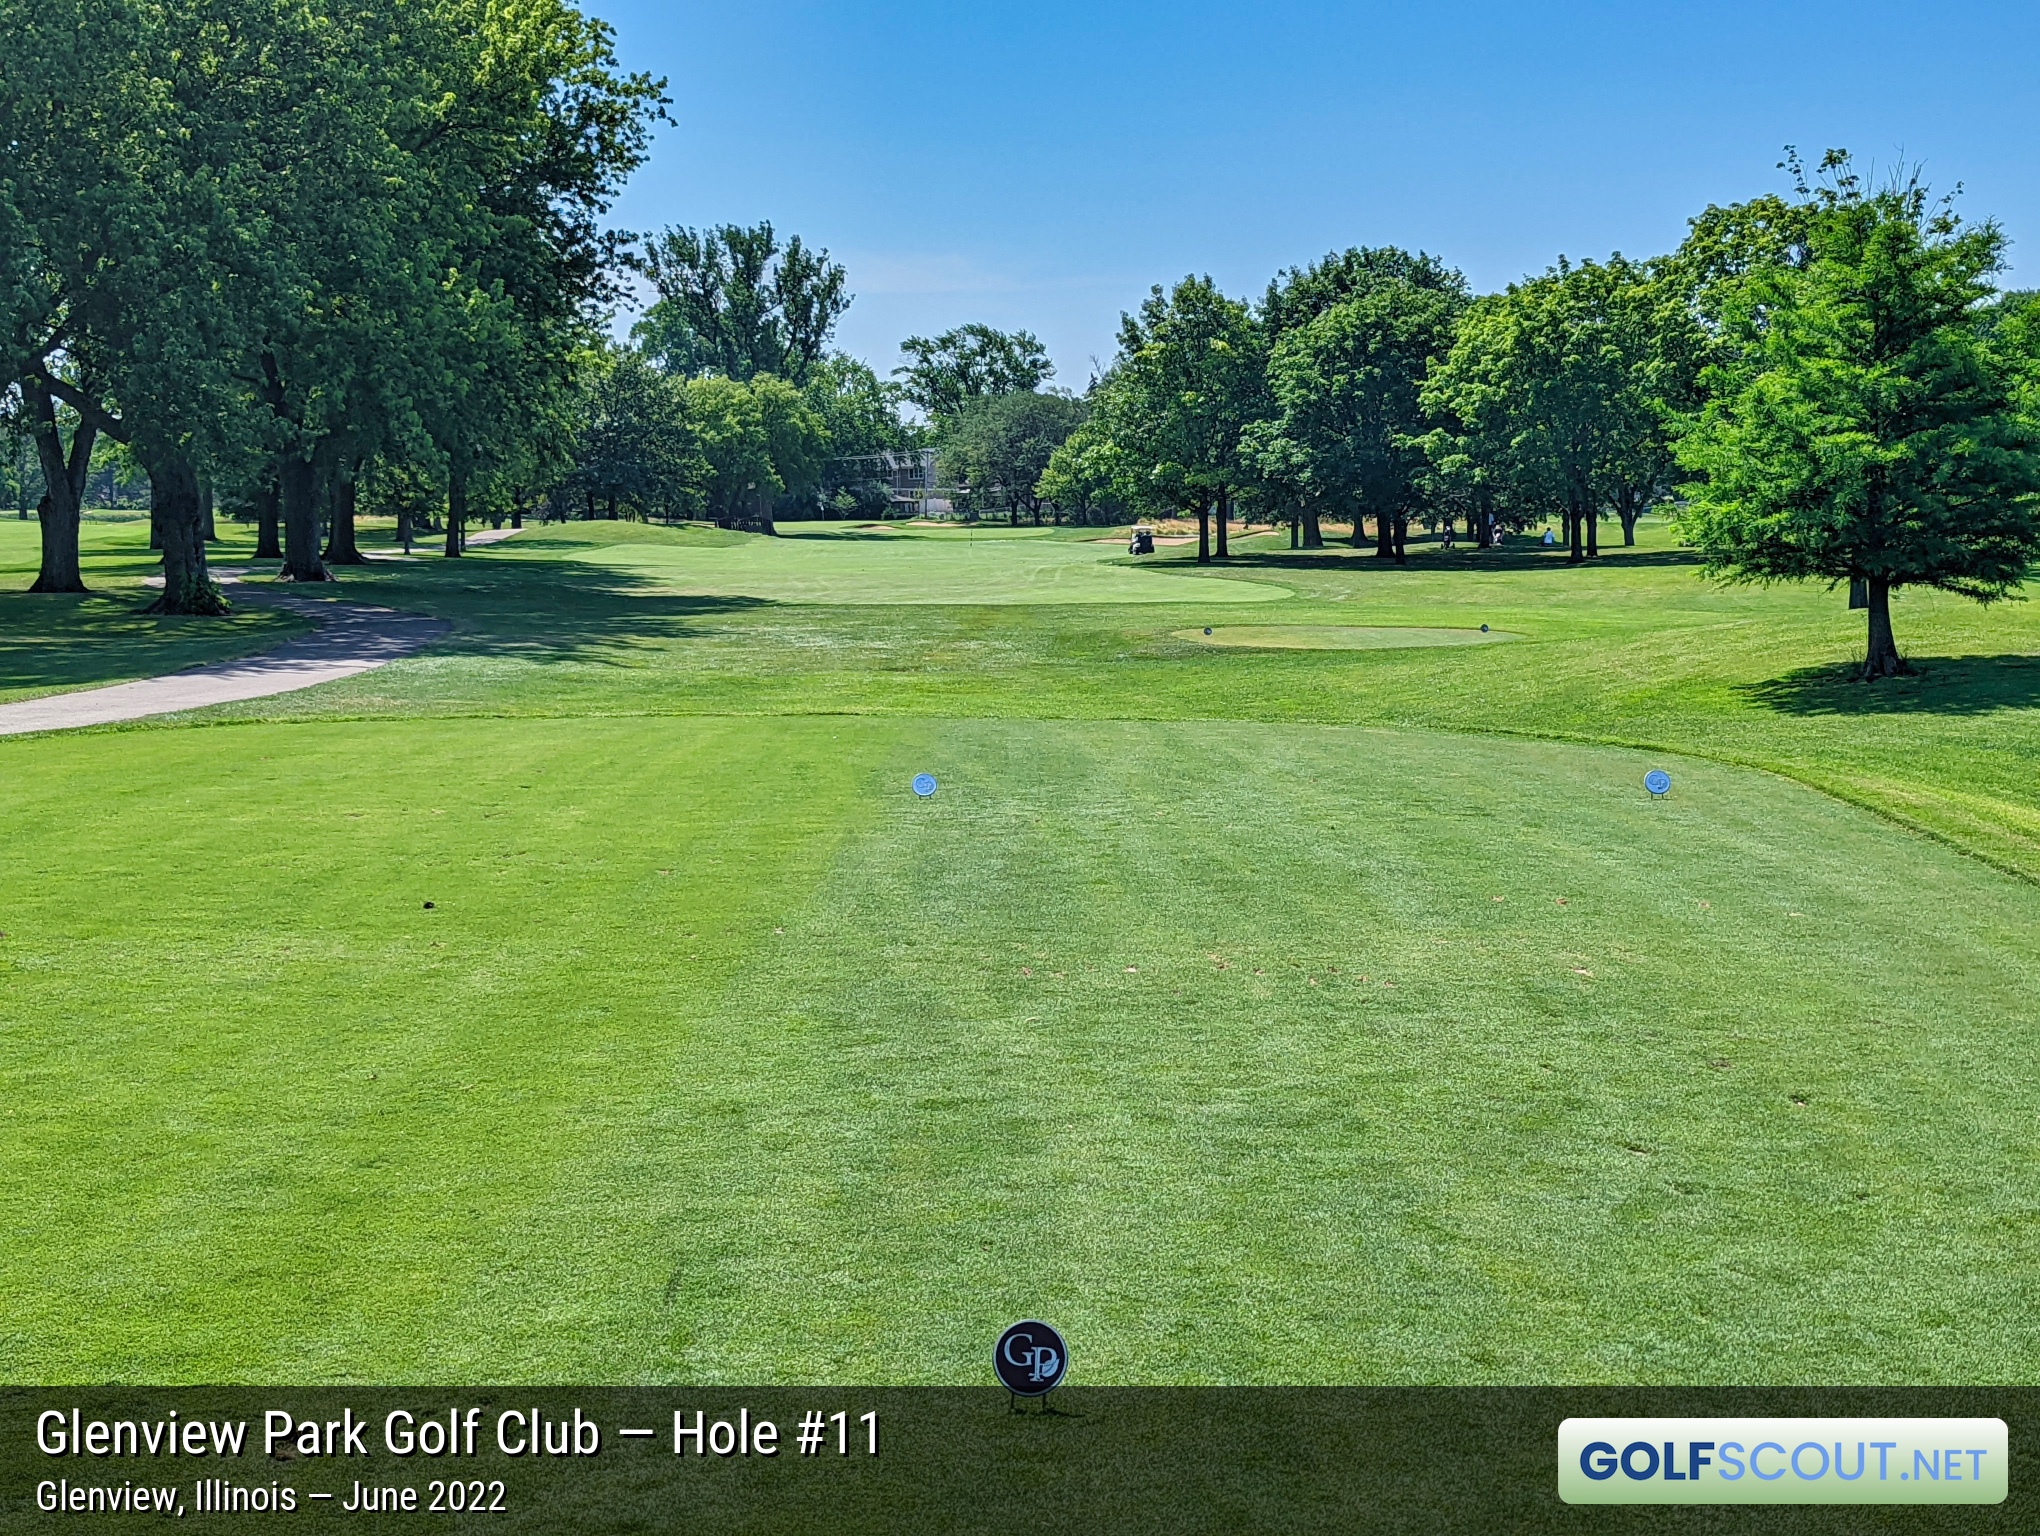 Photo of hole #11 at Glenview Park Golf Club in Glenview, Illinois. 